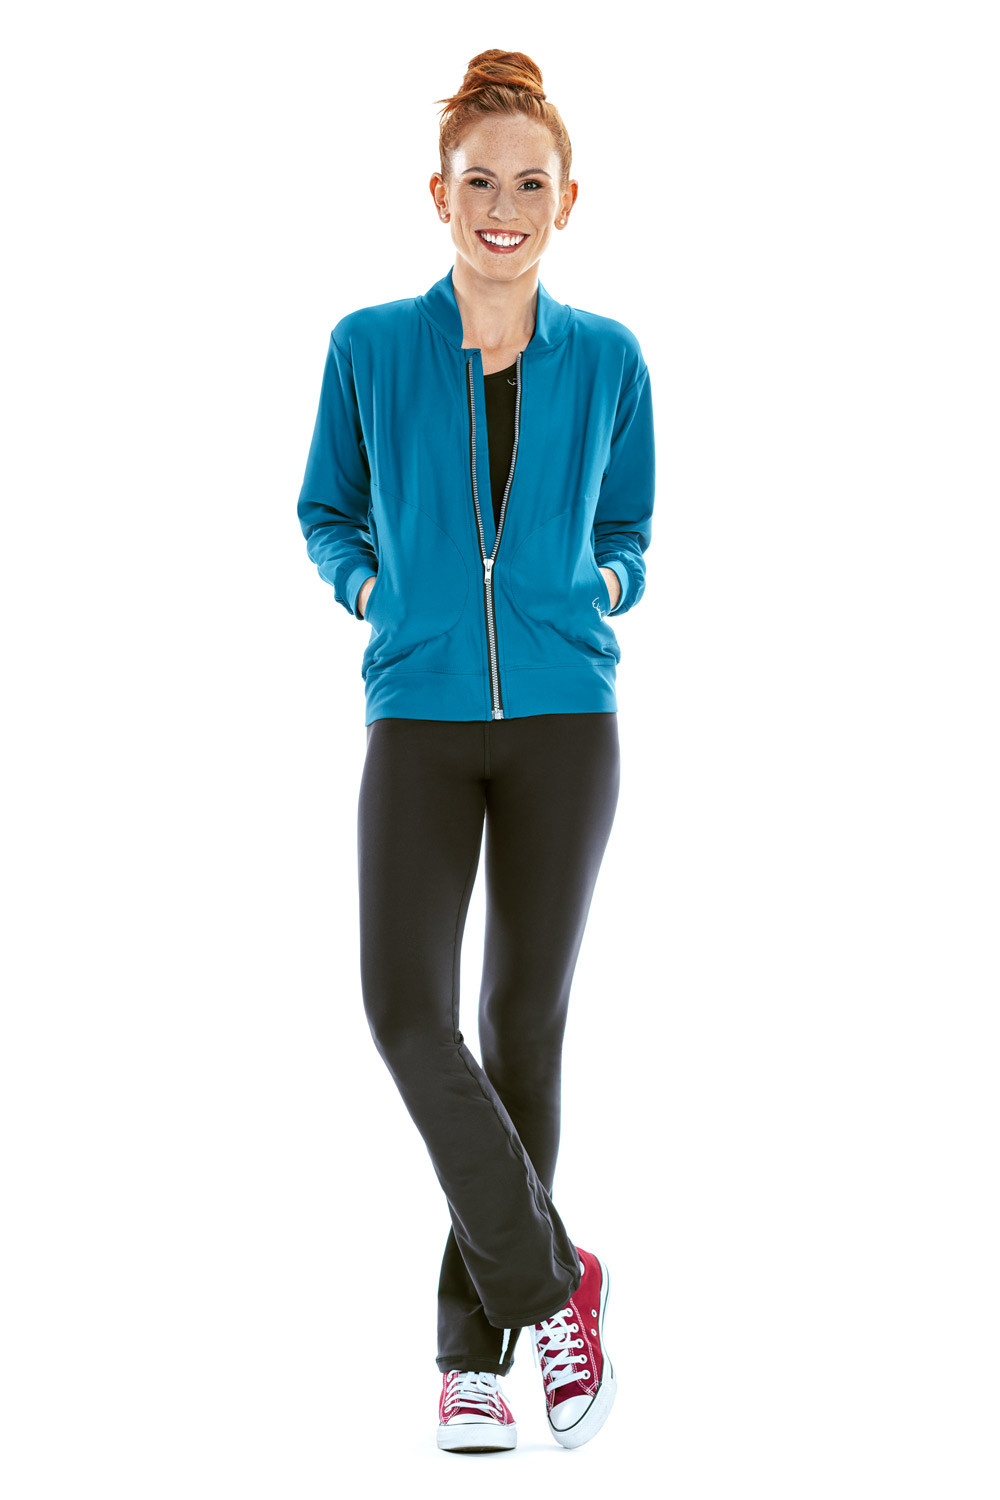 Women's Everyday Soft Ultra High-rise Bootcut Leggings - All In Motion™ :  Target